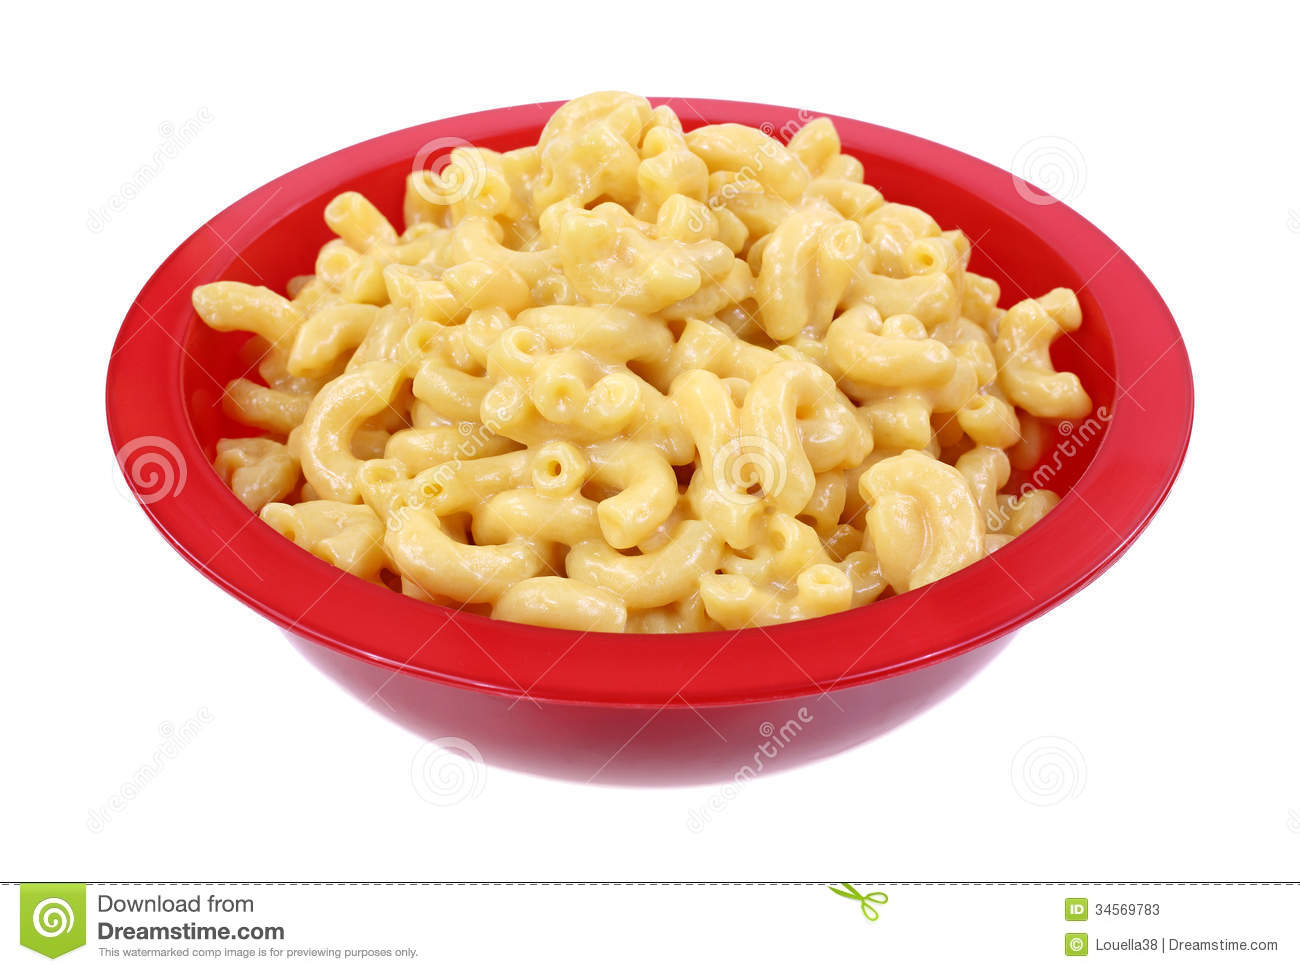 Cooked Macaroni And Cheese In A Red Bowl On A White Background